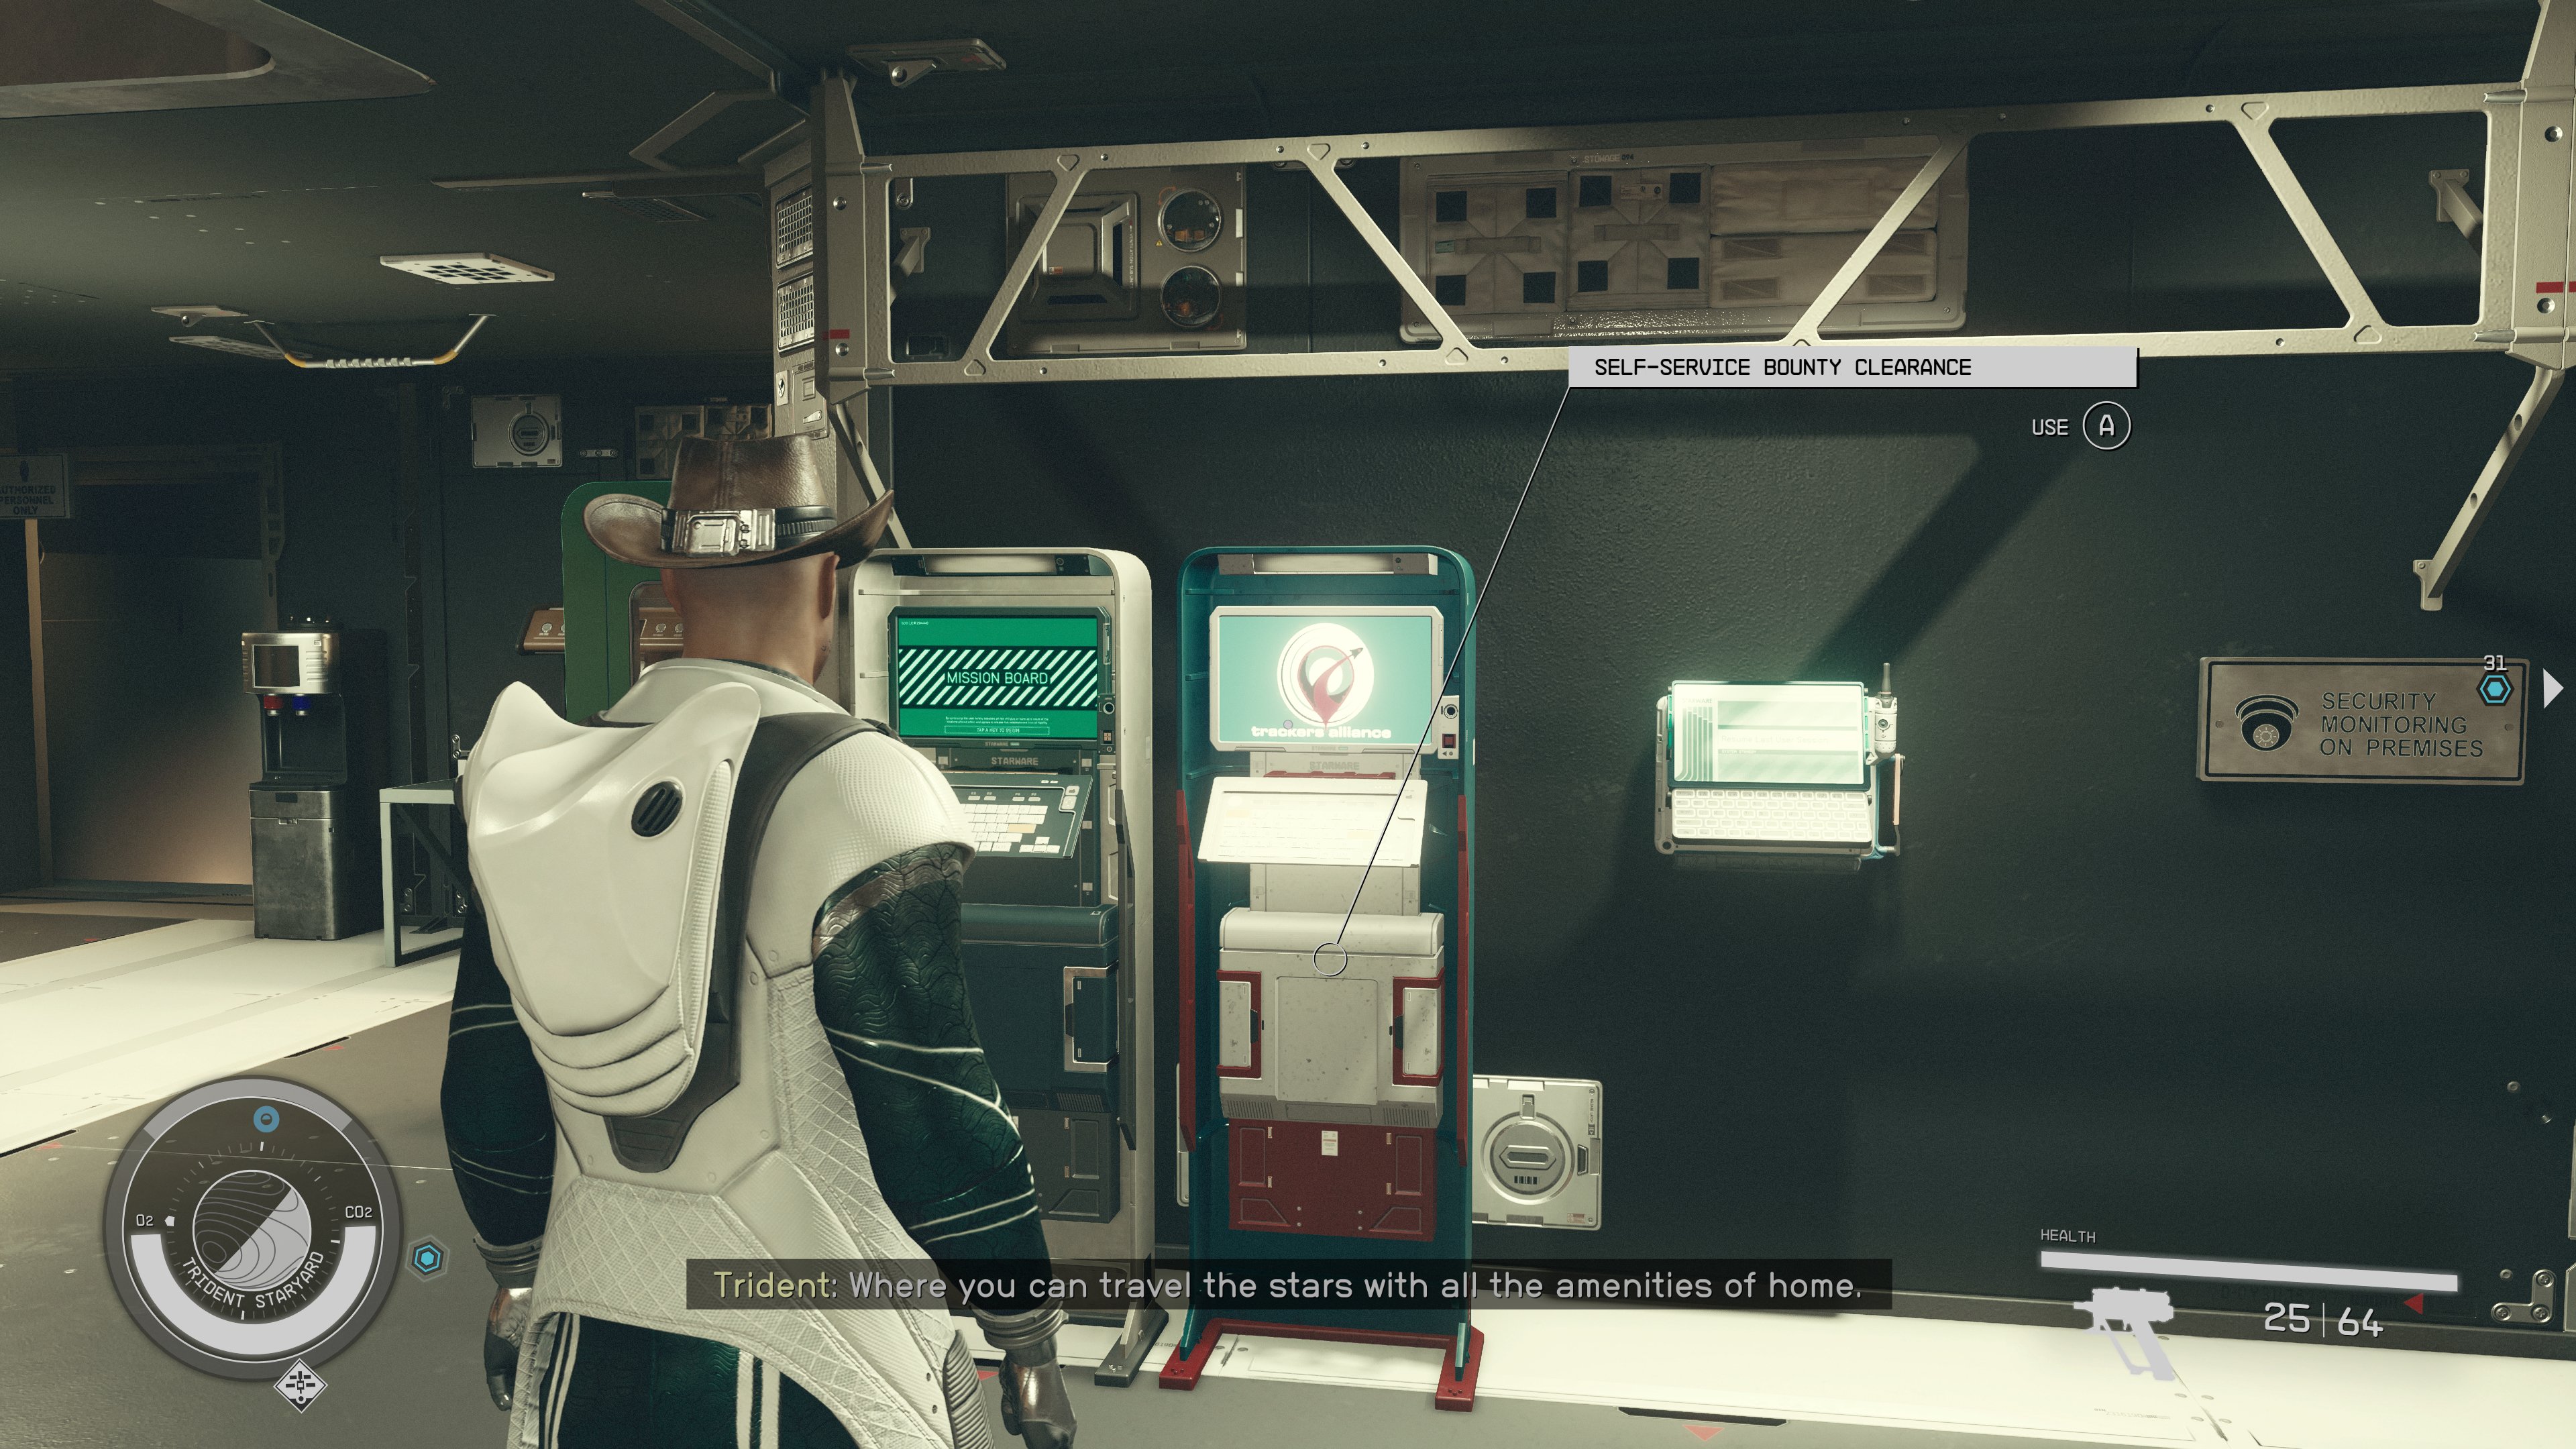 Starfield player on the Trident Luxury Lines Space Station using a bounty clearance kiosk